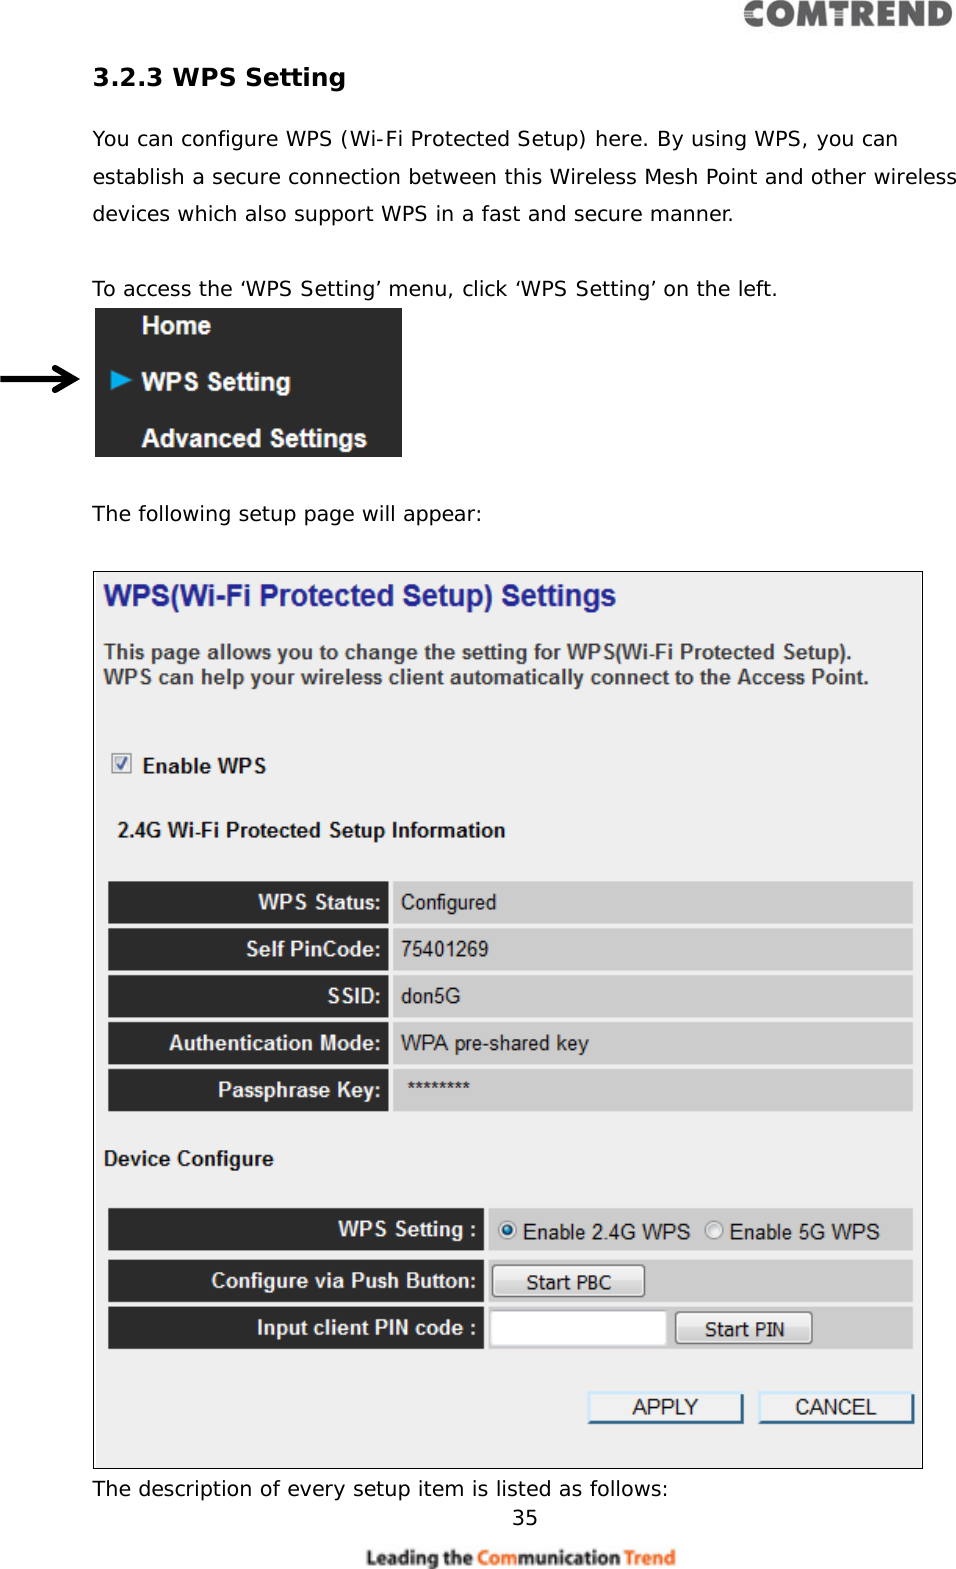     35  3.2.3 WPS Setting You can configure WPS (Wi-Fi Protected Setup) here. By using WPS, you can establish a secure connection between this Wireless Mesh Point and other wireless devices which also support WPS in a fast and secure manner.  To access the ‘WPS Setting’ menu, click ‘WPS Setting’ on the left.   The following setup page will appear:   The description of every setup item is listed as follows: 